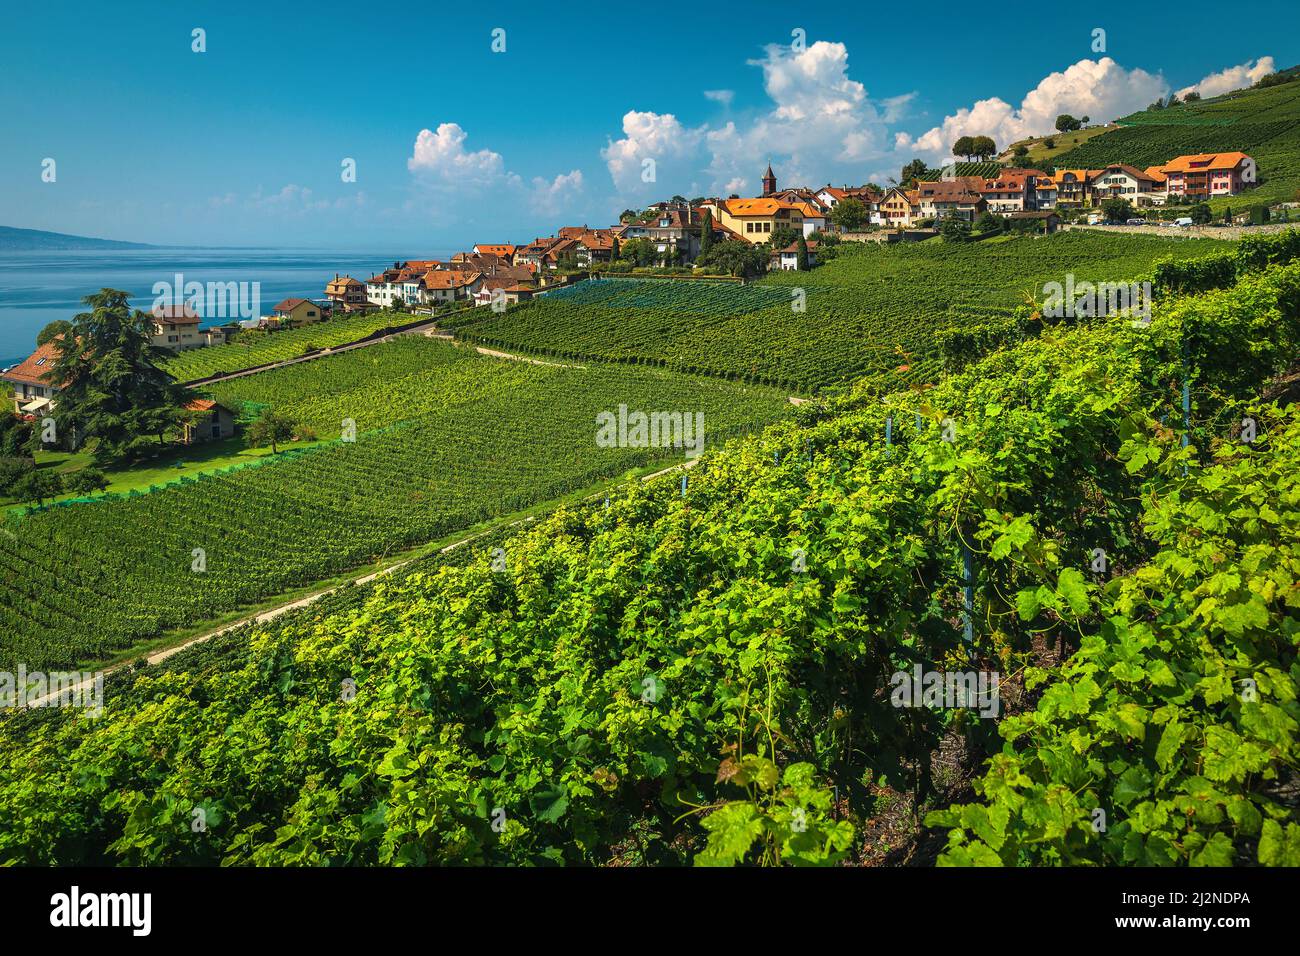 Majestic orderly terraced vineyard and Lake Geneva in background. Green vine plantation and cute village on the hill, Rivaz, Canton of Vaud, Switzerla Stock Photo